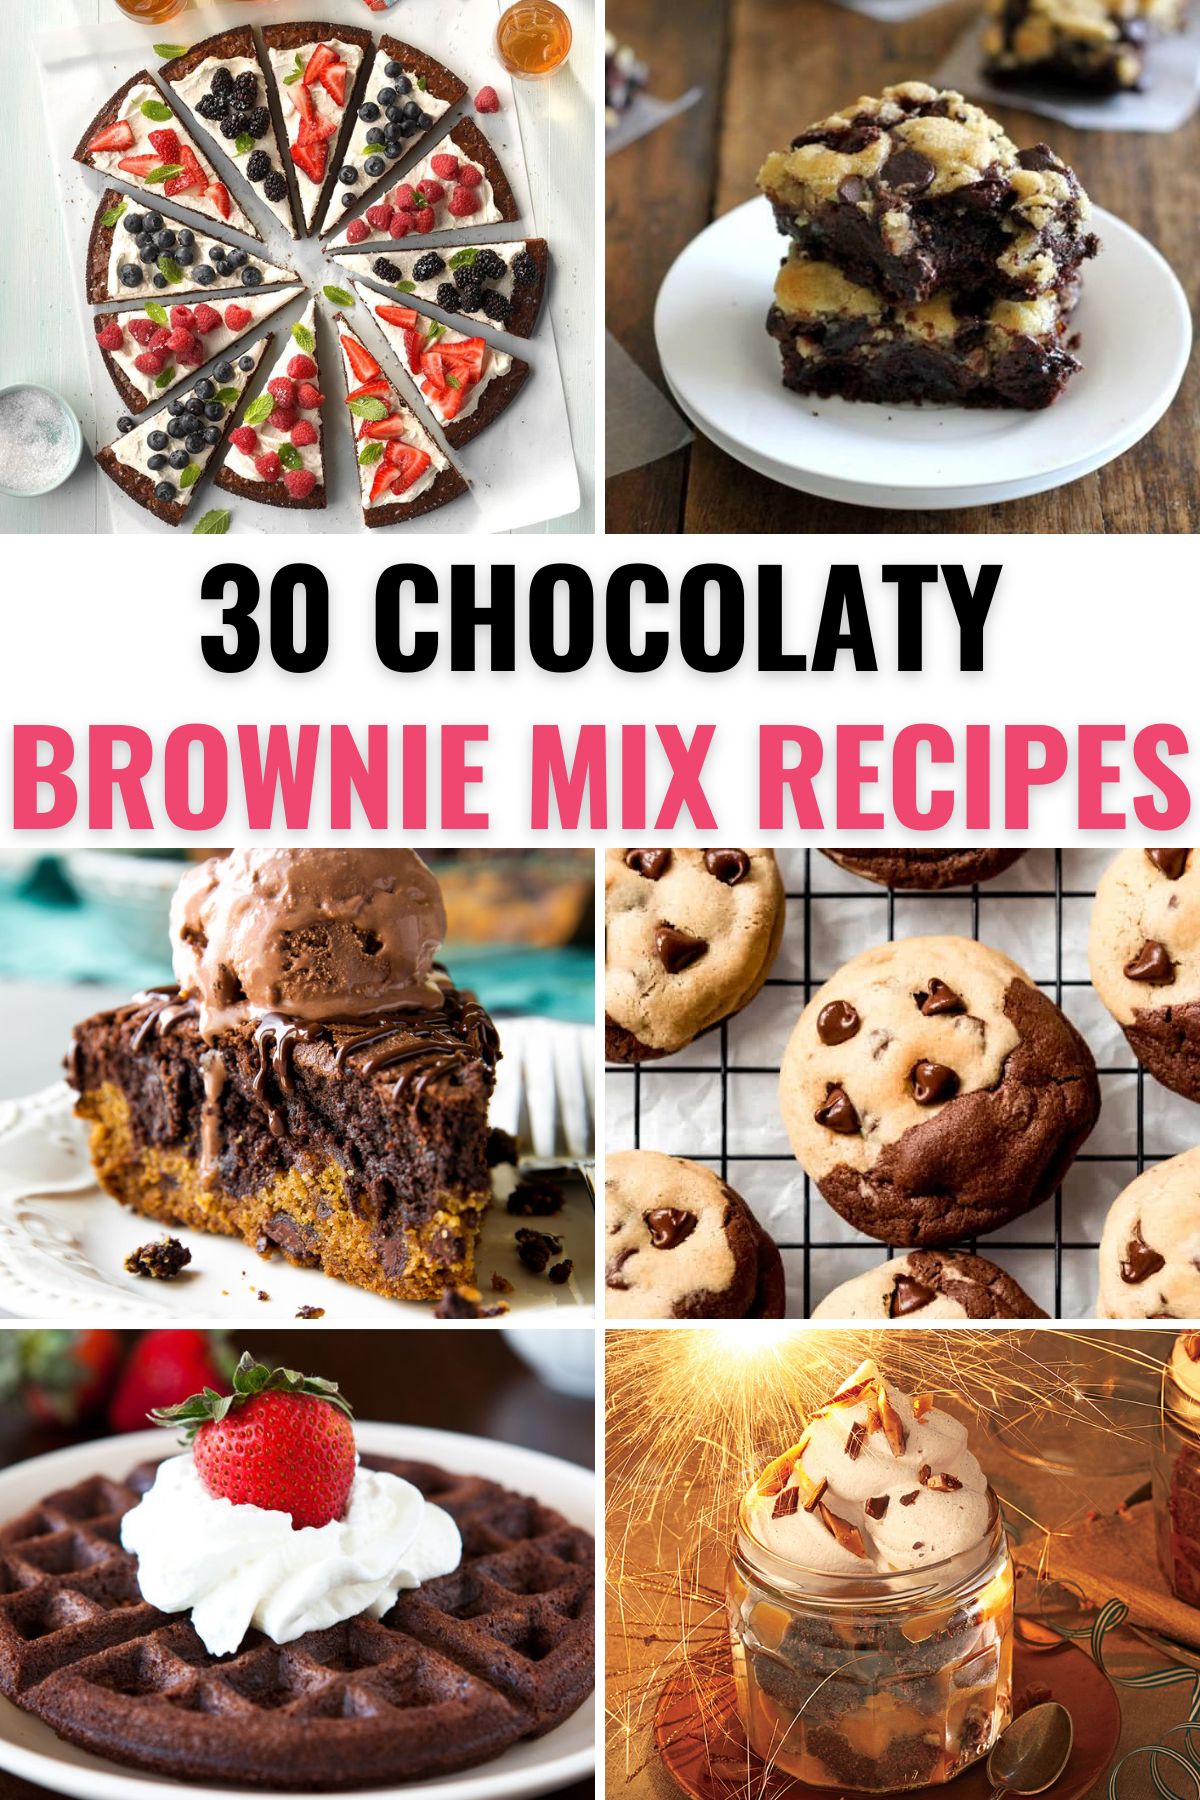 various chocolaty desserts made from brownie mix